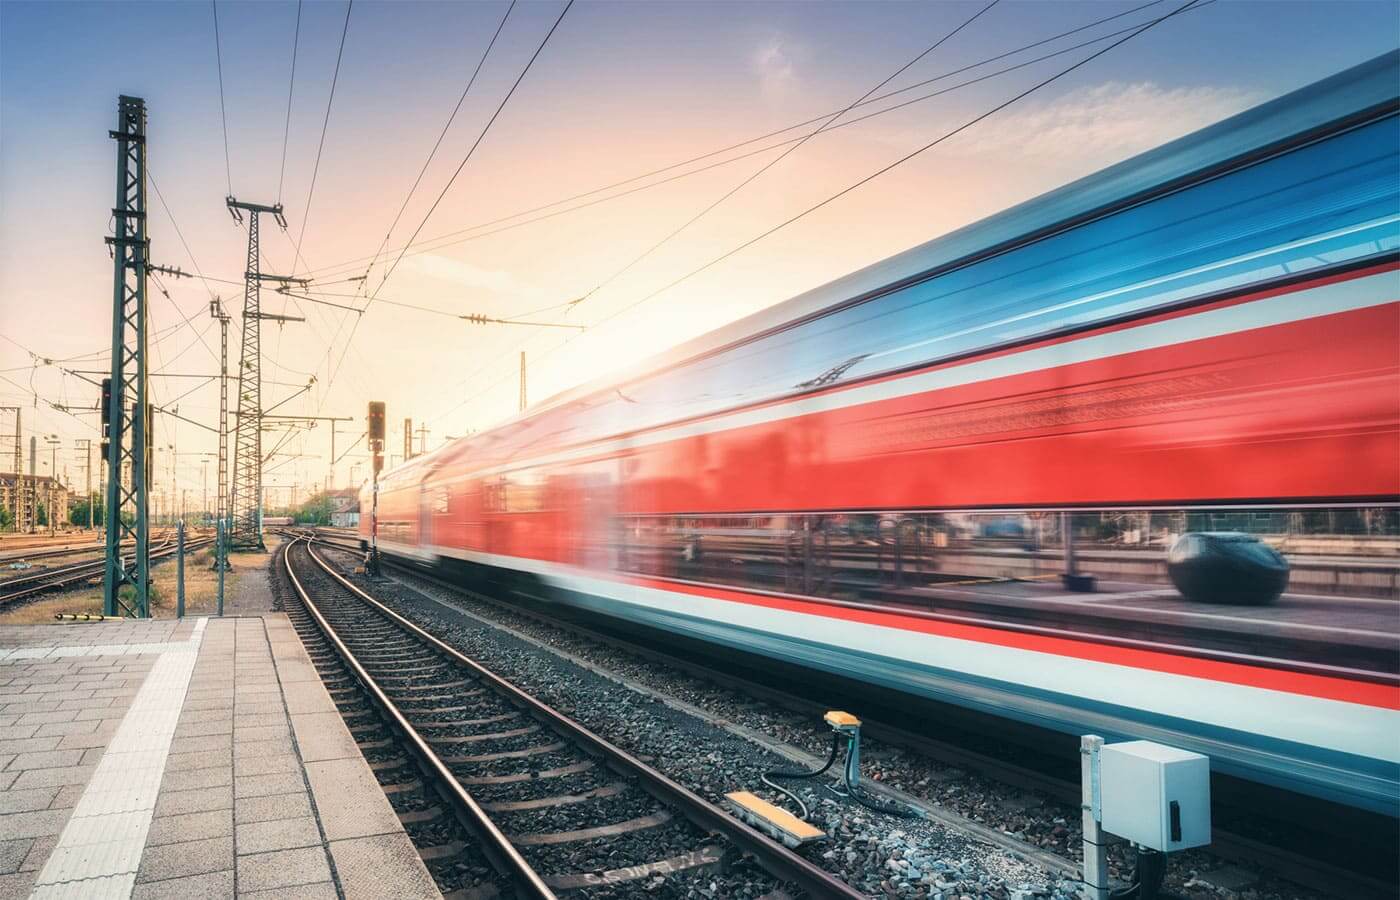 A train traveling at high speed through a station